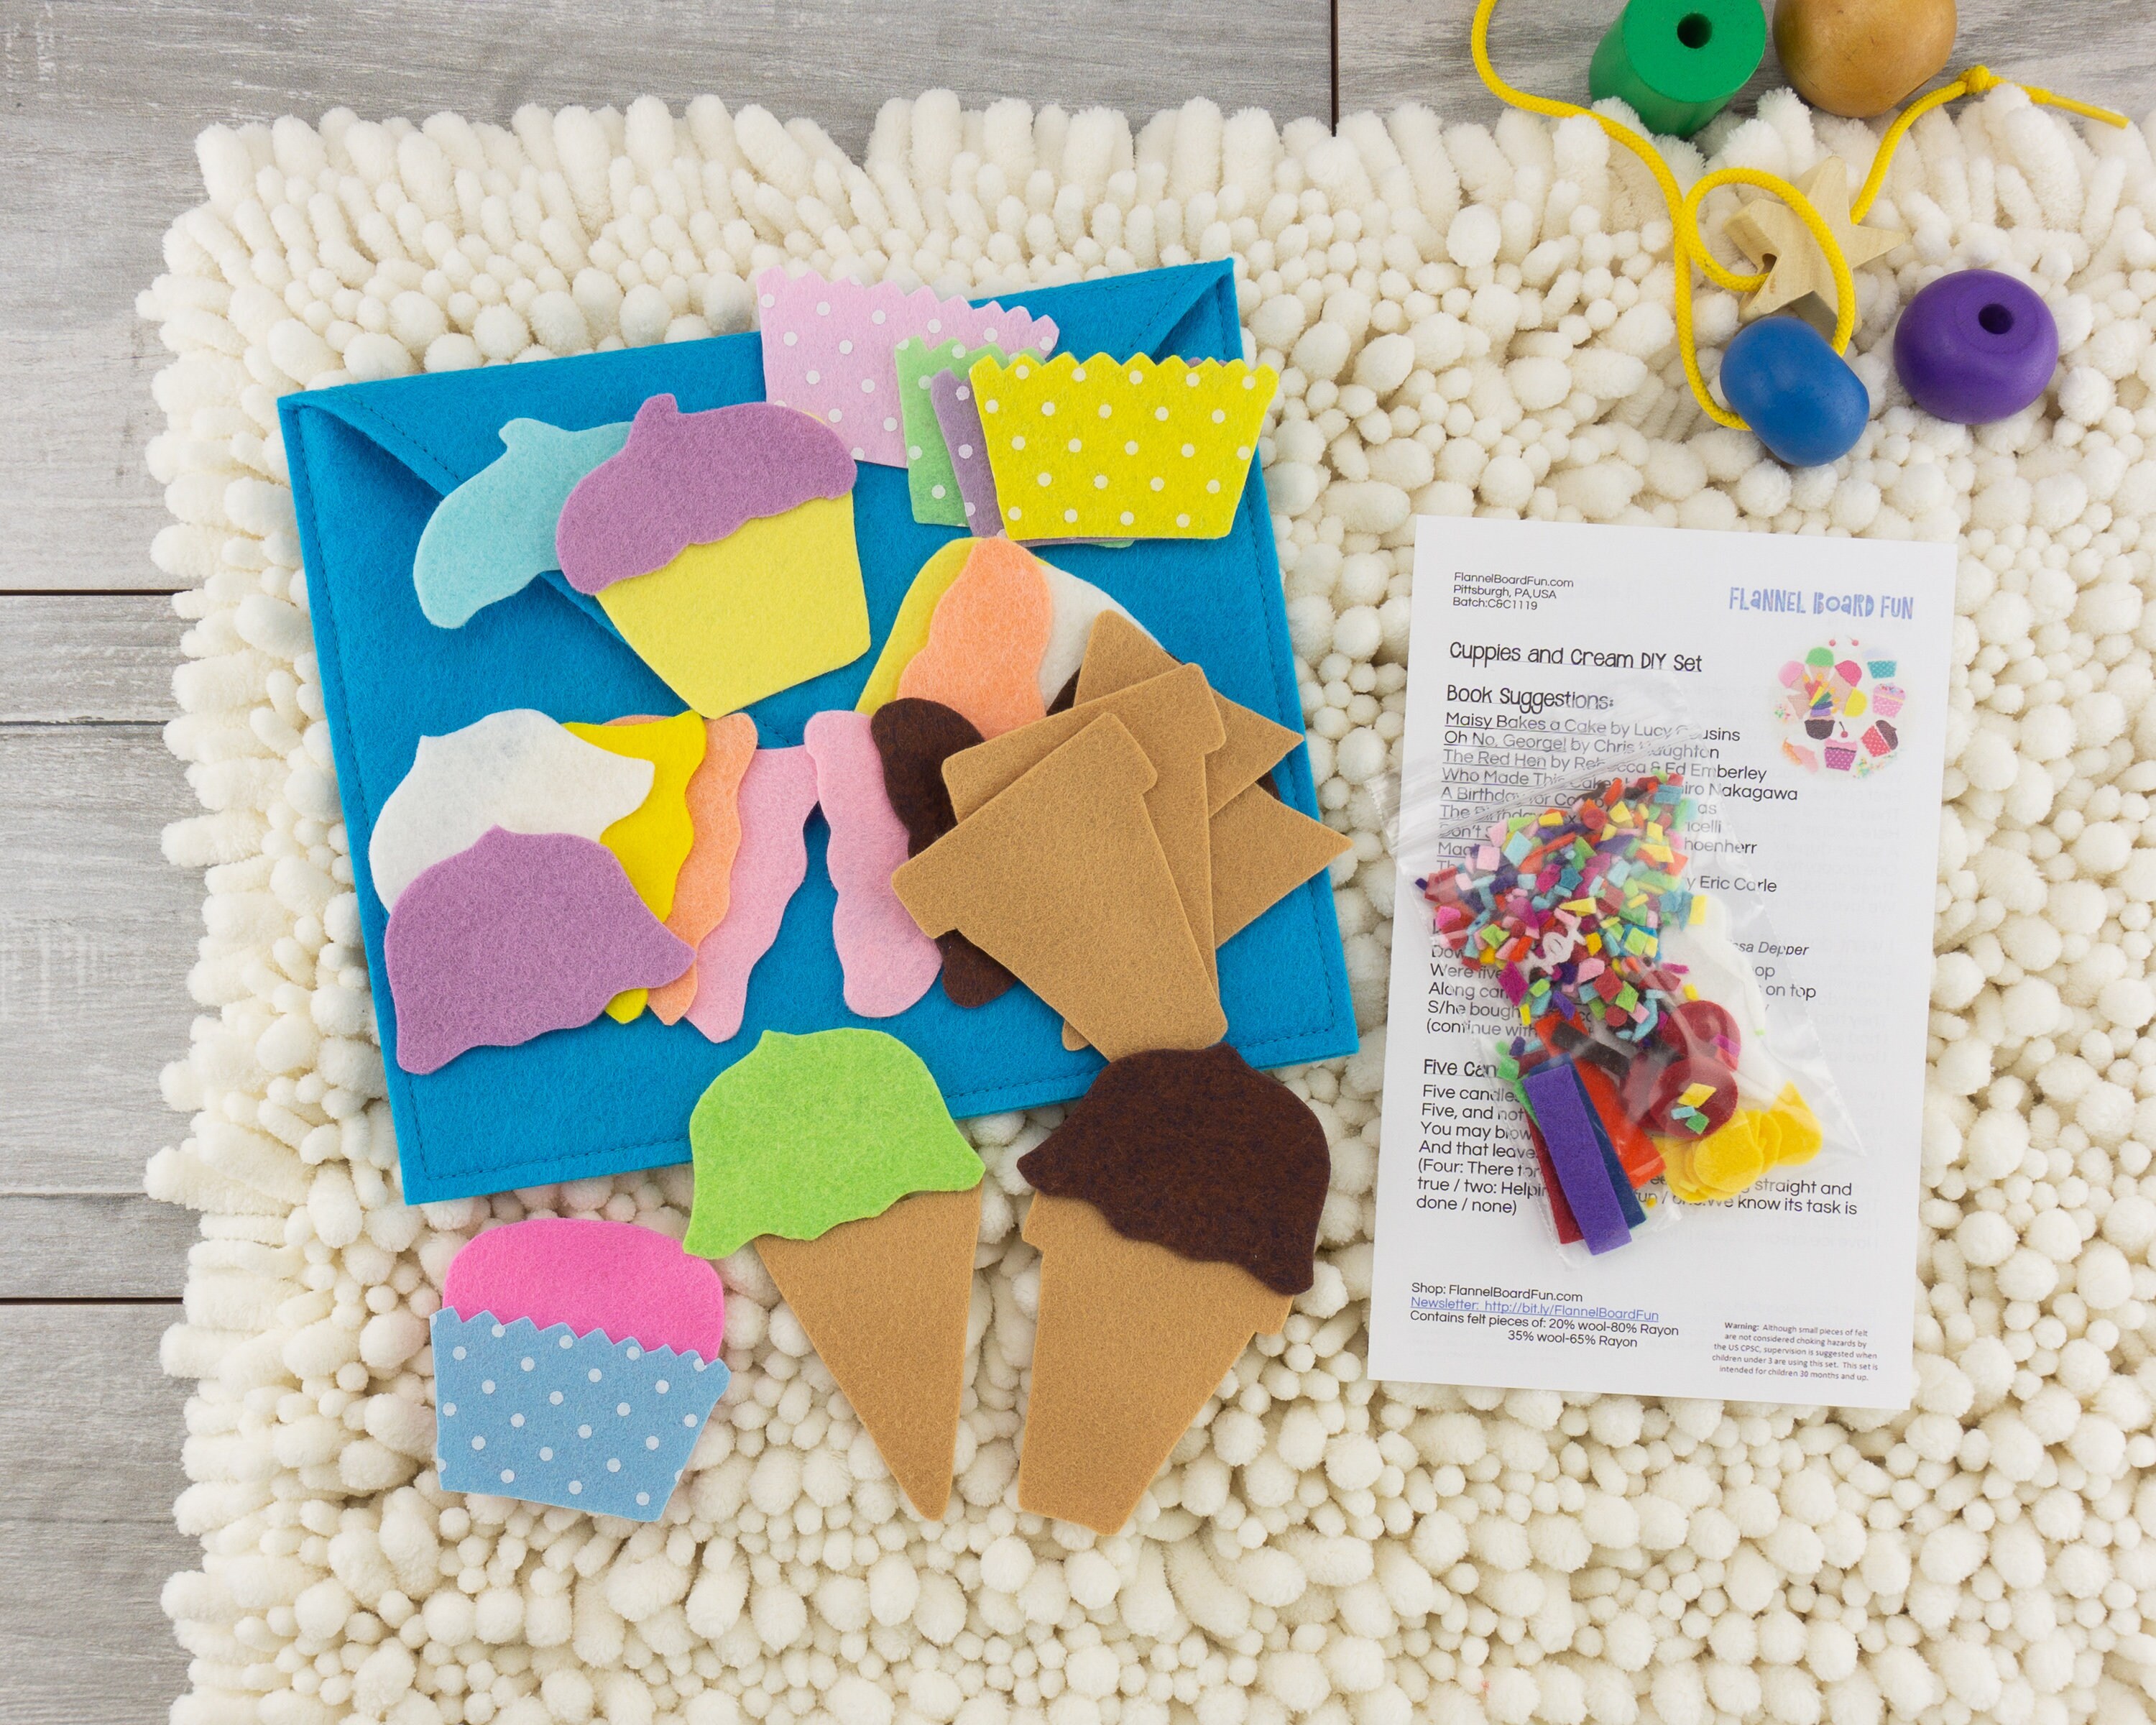 Ice Cream DIY Felt Kit — DIY Craft Kits for Every Skill Level - Creative  and Easy Projects